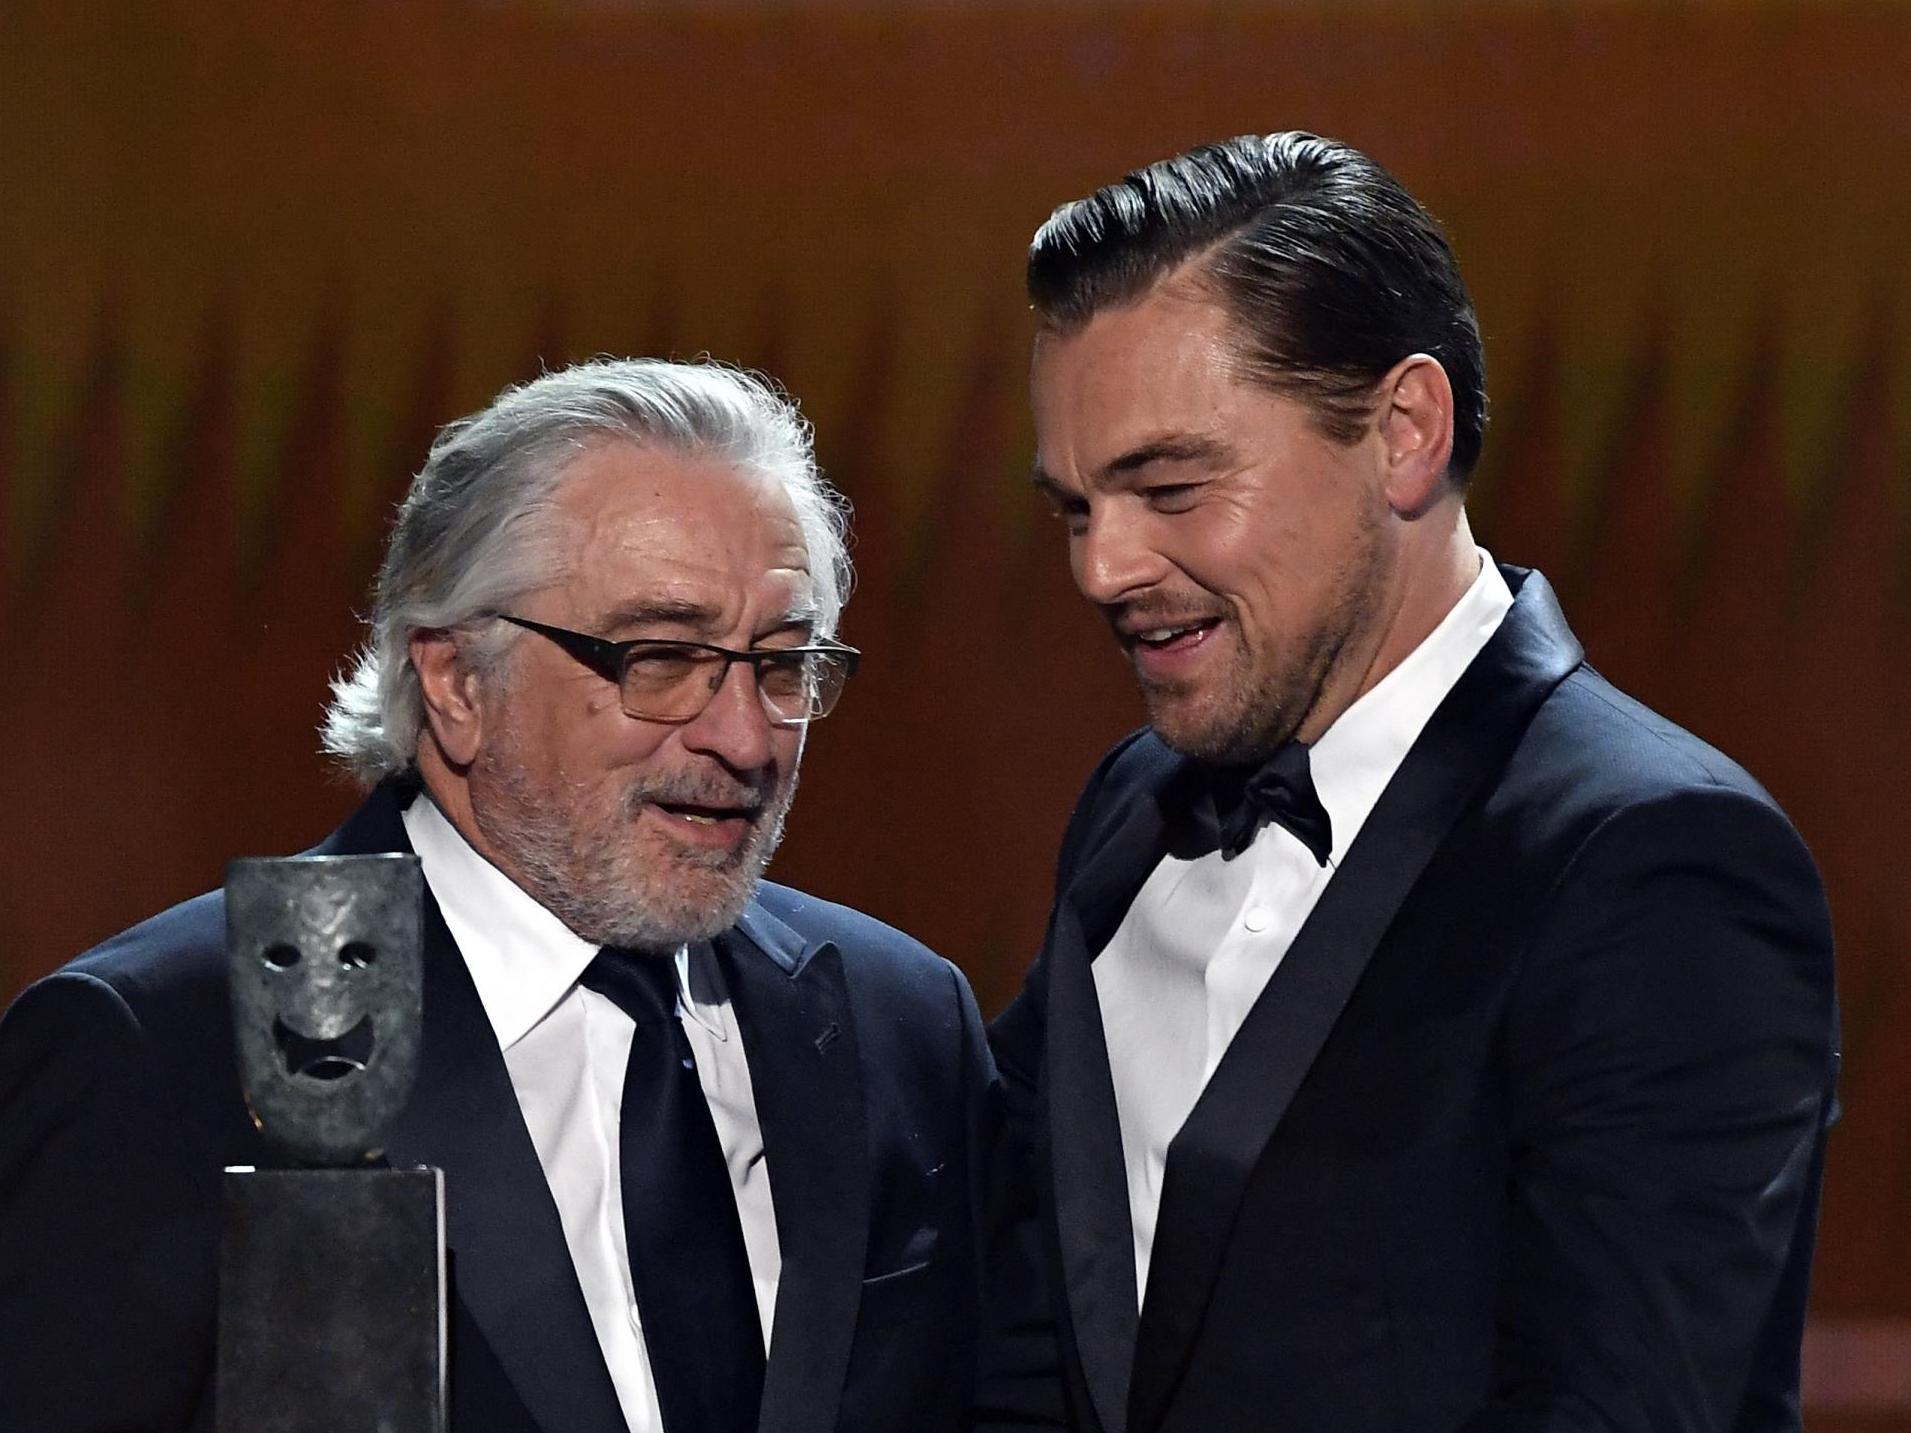 Killers of the Flower Moon Robert De Niro and Leonardo DiCaprio to reunite in new Martin Scorsese film The Independent The Independent